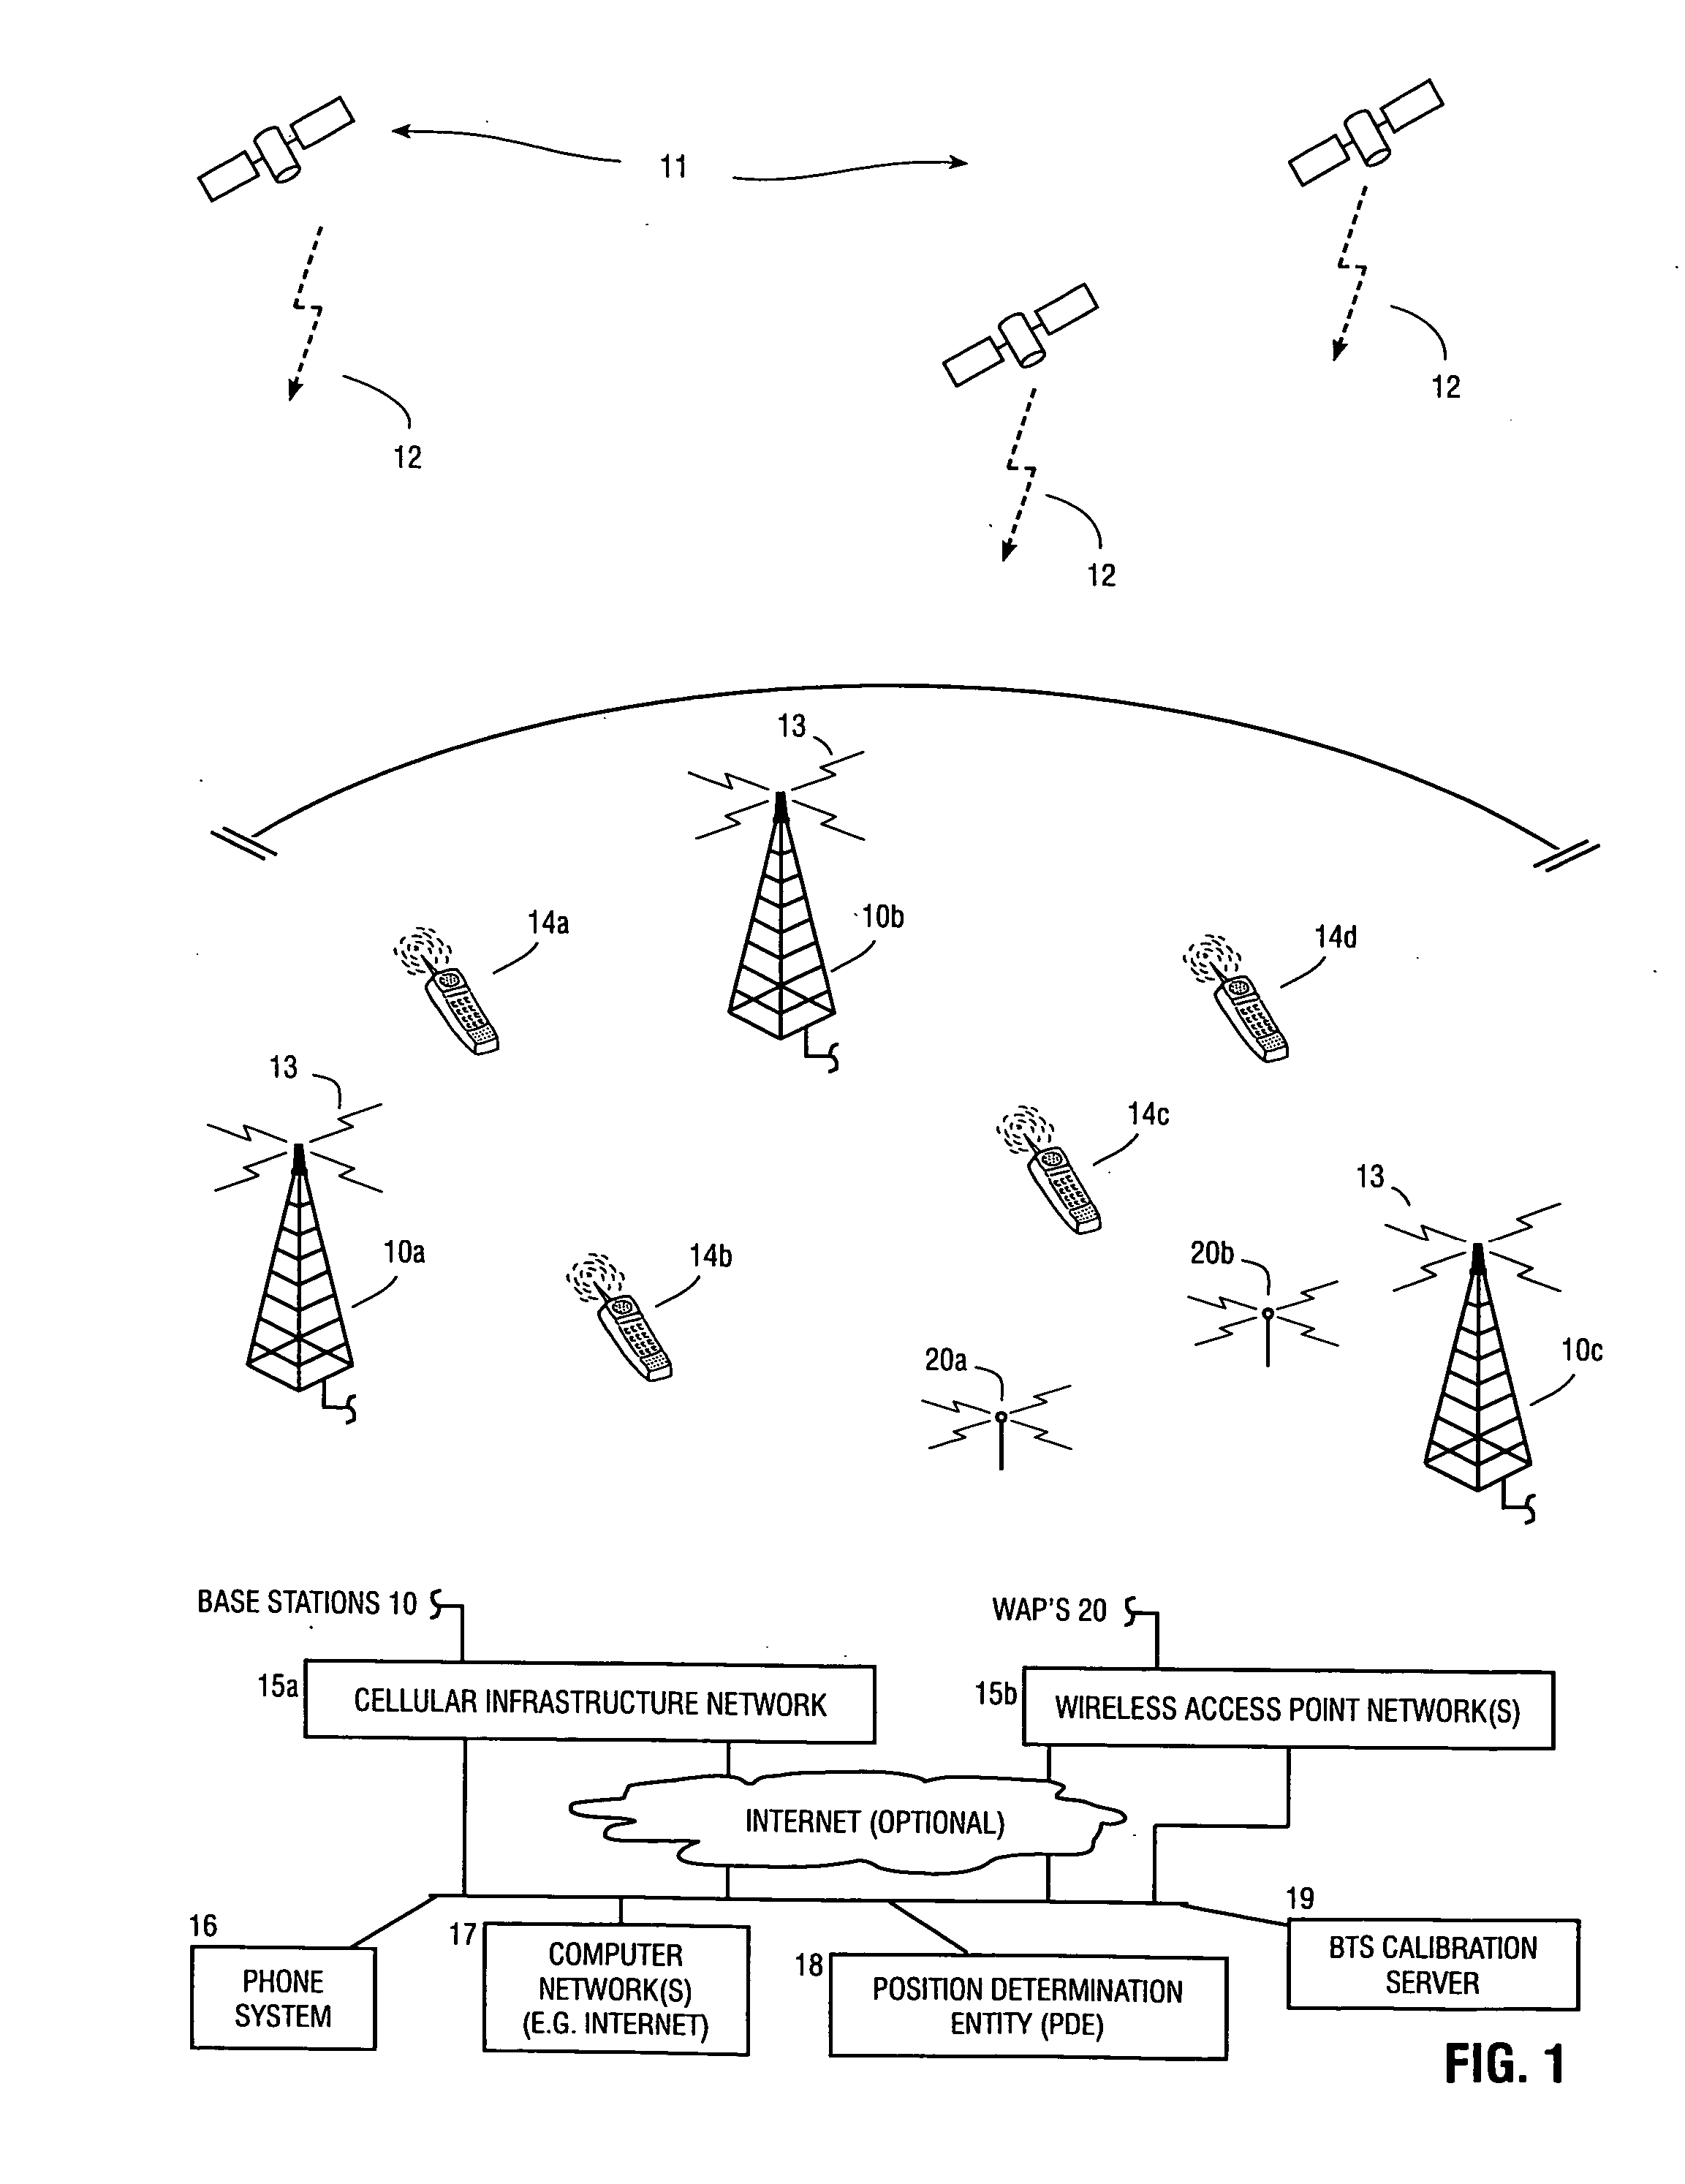 Method and apparatus for determining location of a base station using a plurality of mobile stations in a wireless mobile network